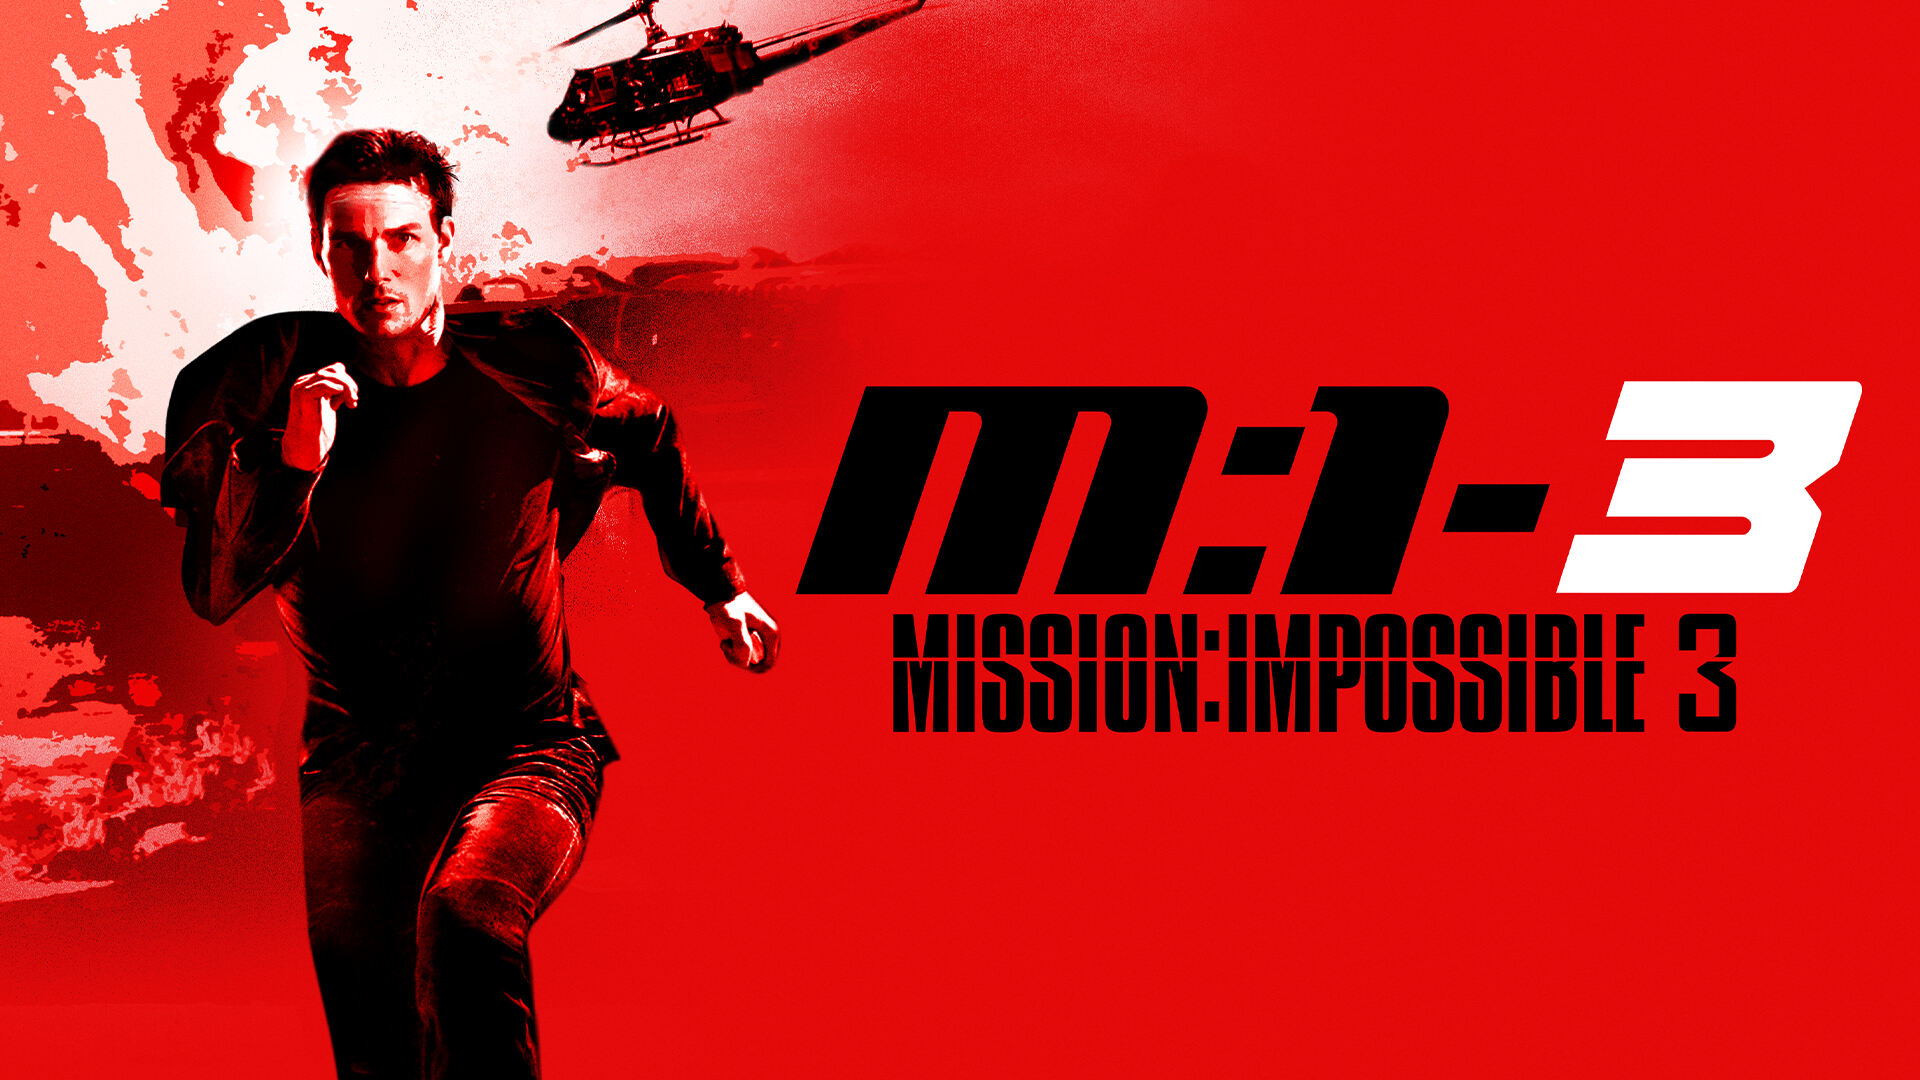 49-facts-about-the-movie-mission-impossible-iii